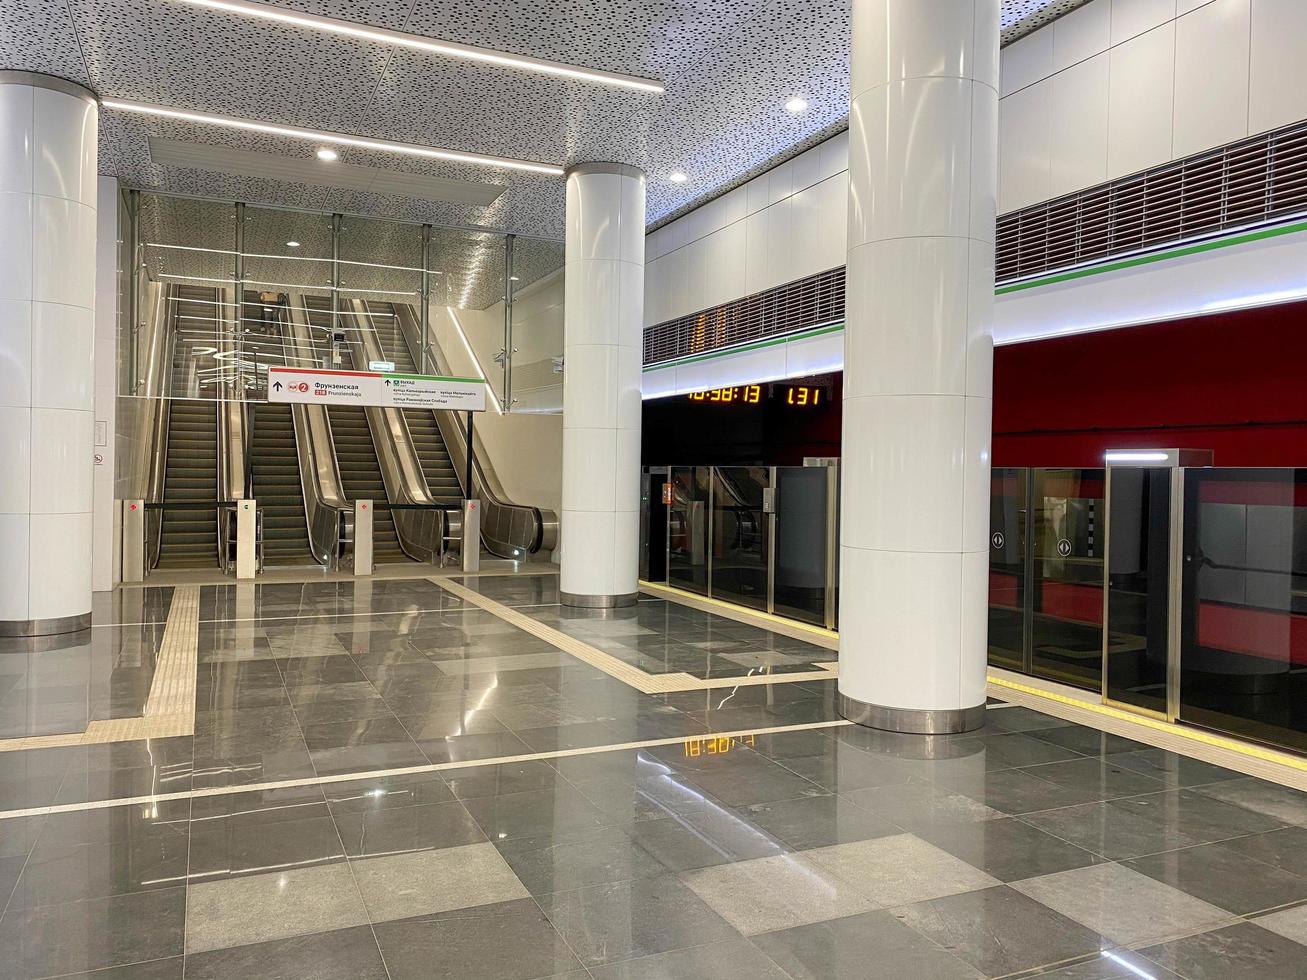 Subway with increased security. new metro stations with a door non-opening system. double security, automatic doors before entering the train. large white columns at the metro station photo